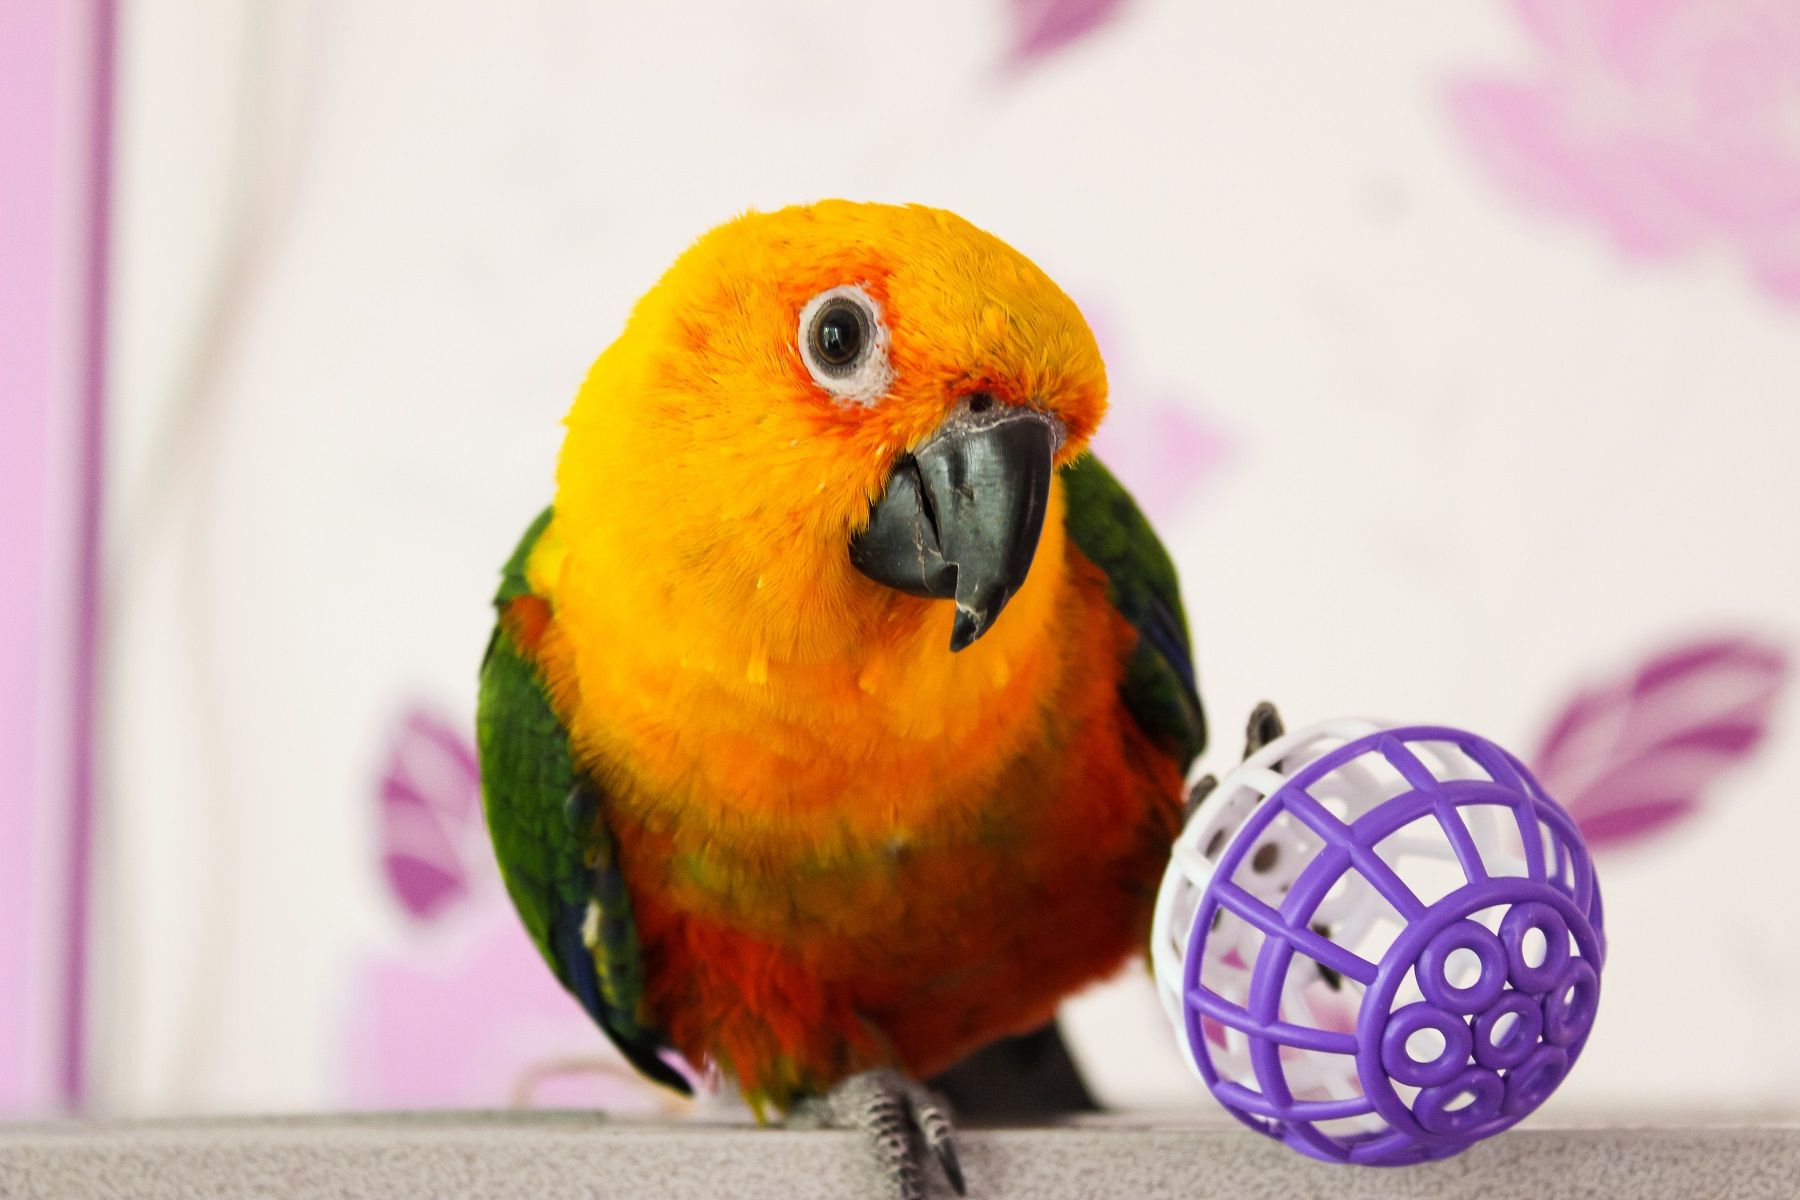 Sun conure parrot playing with a ball, looking into the camera